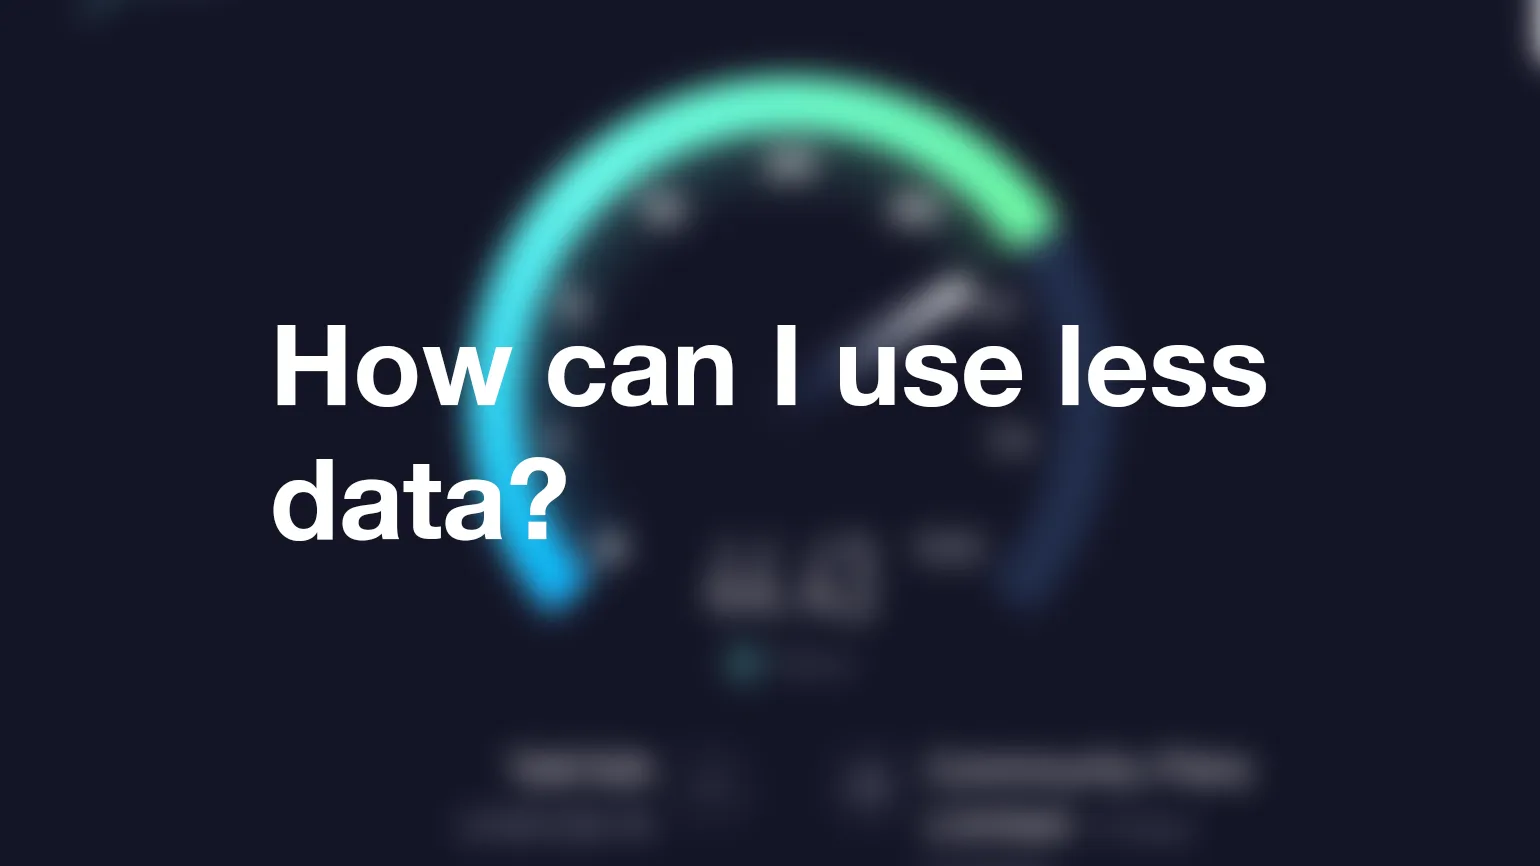 How can I use less data?